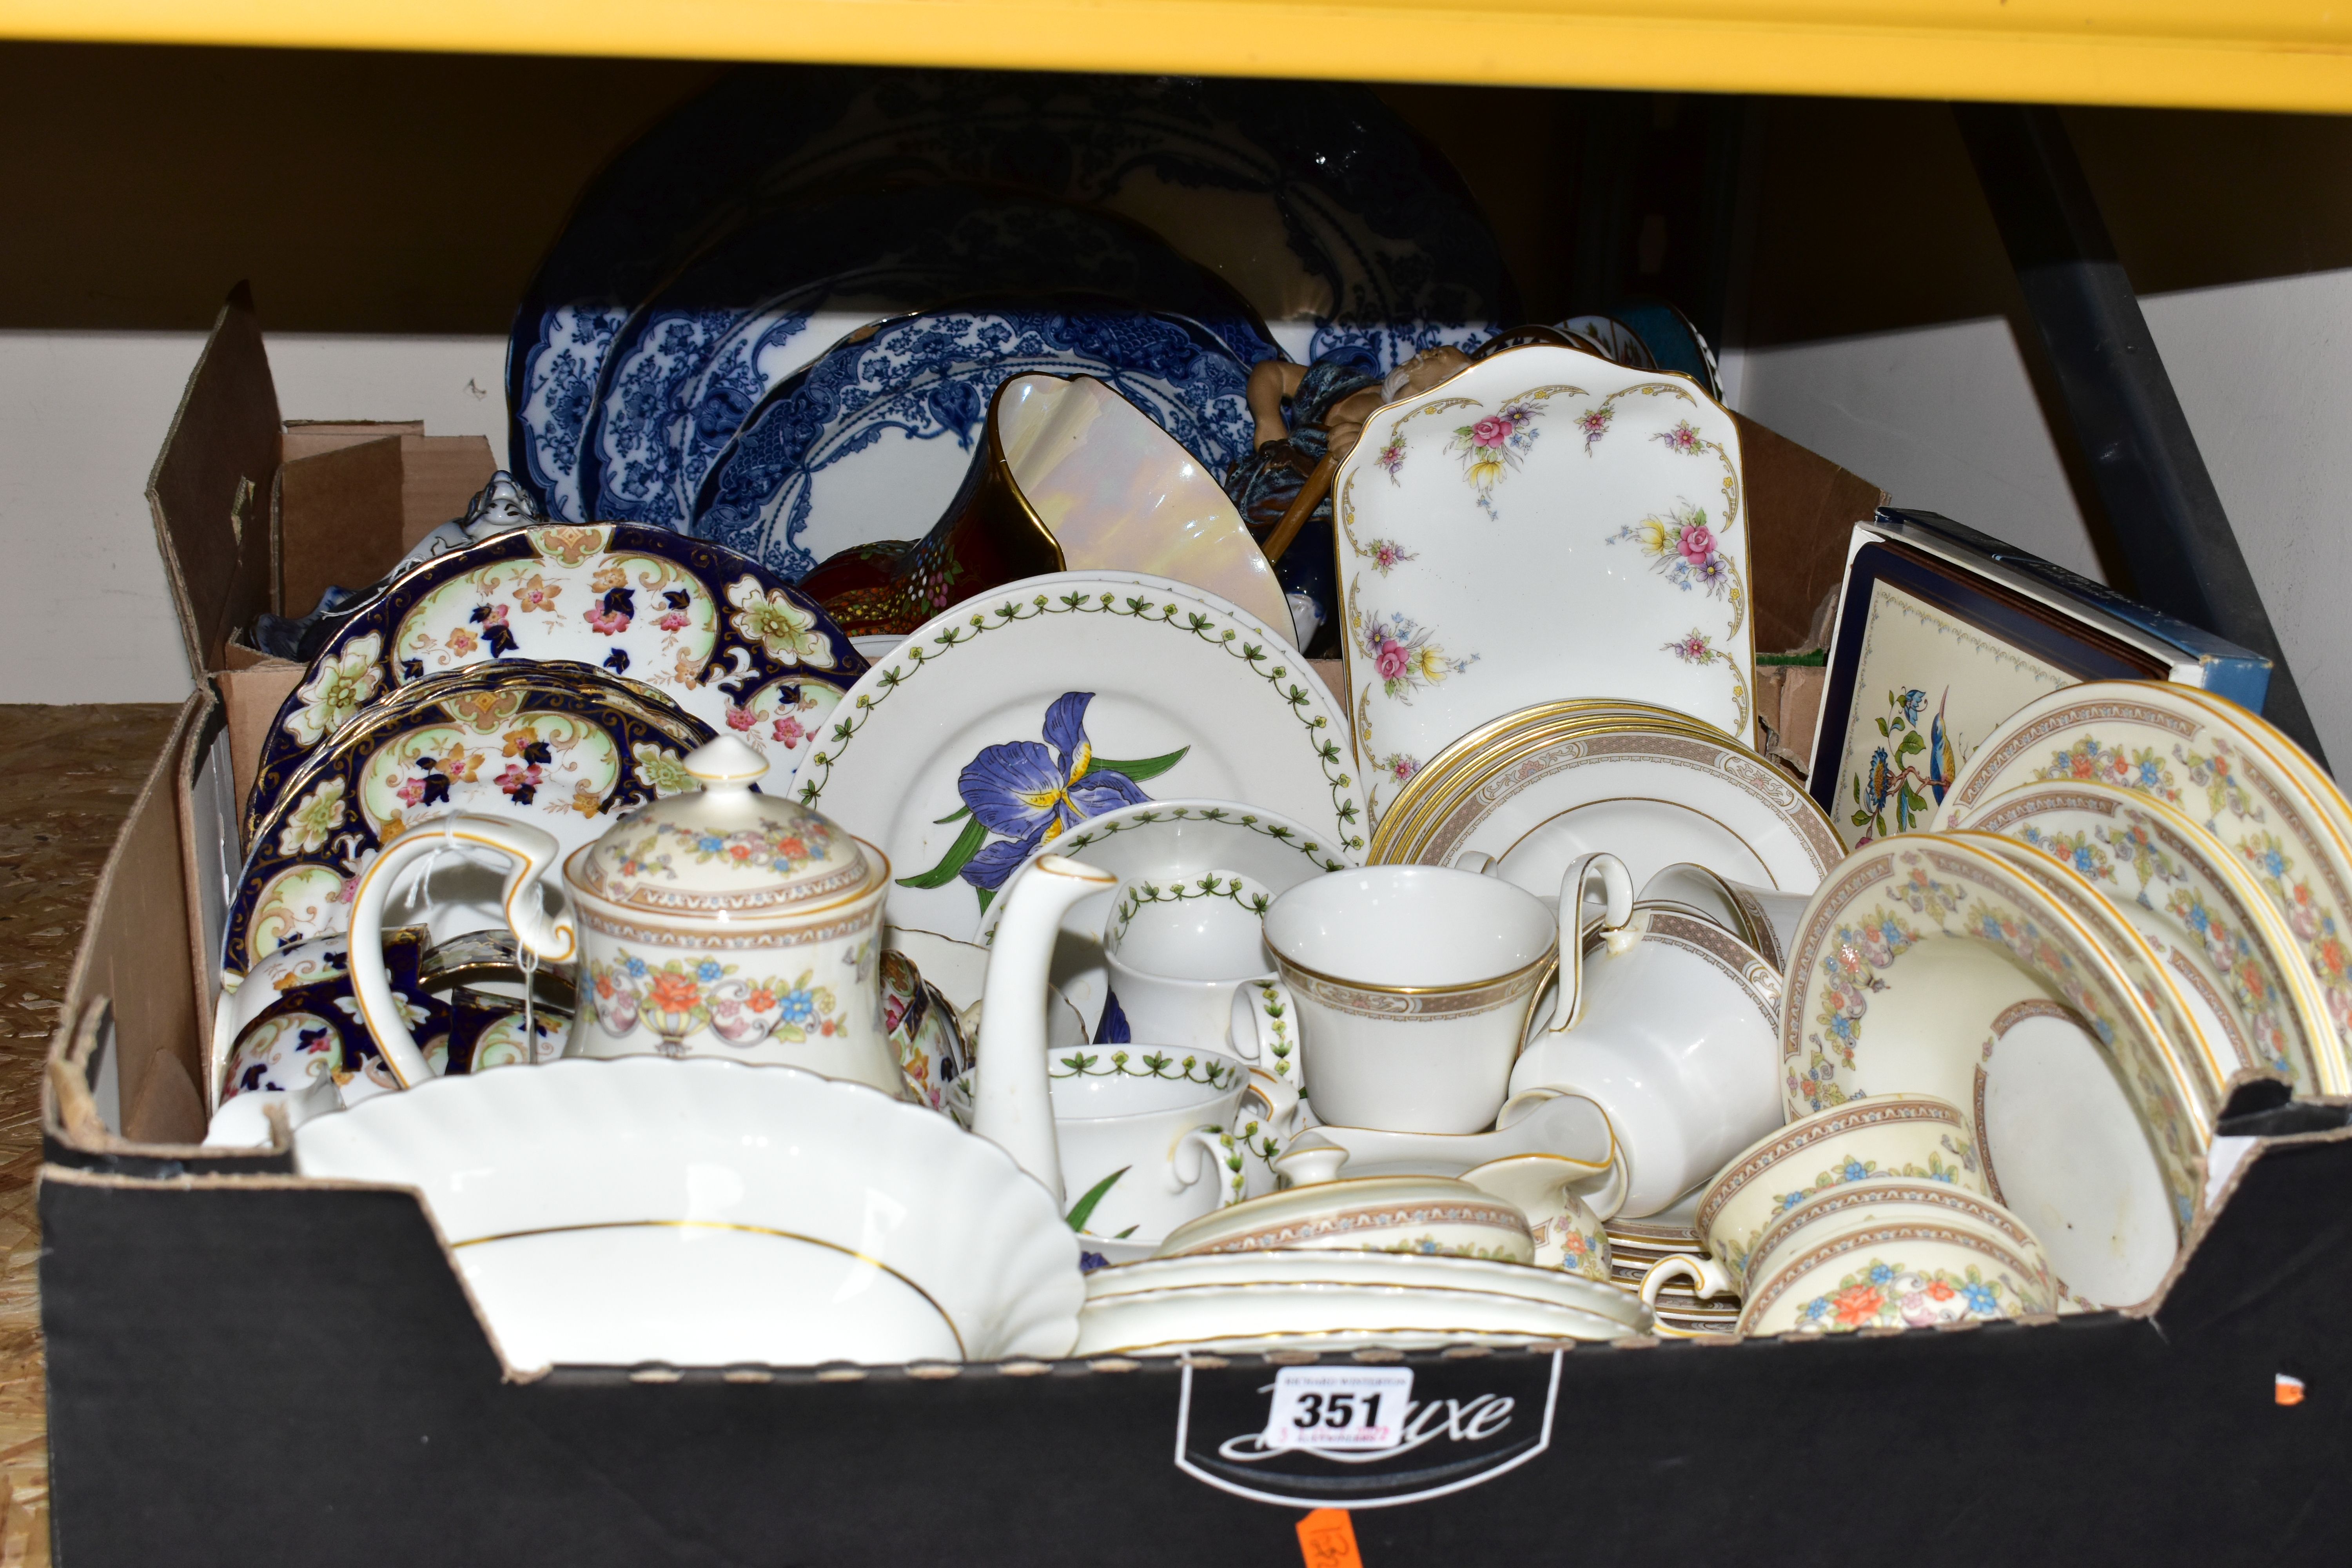 TWO BOXES OF AYNSLEY 'DEVONSHIRE' PATTERN DINNER WARES, BLUE & WHITE DINNER WARES, ASSORTED TEA